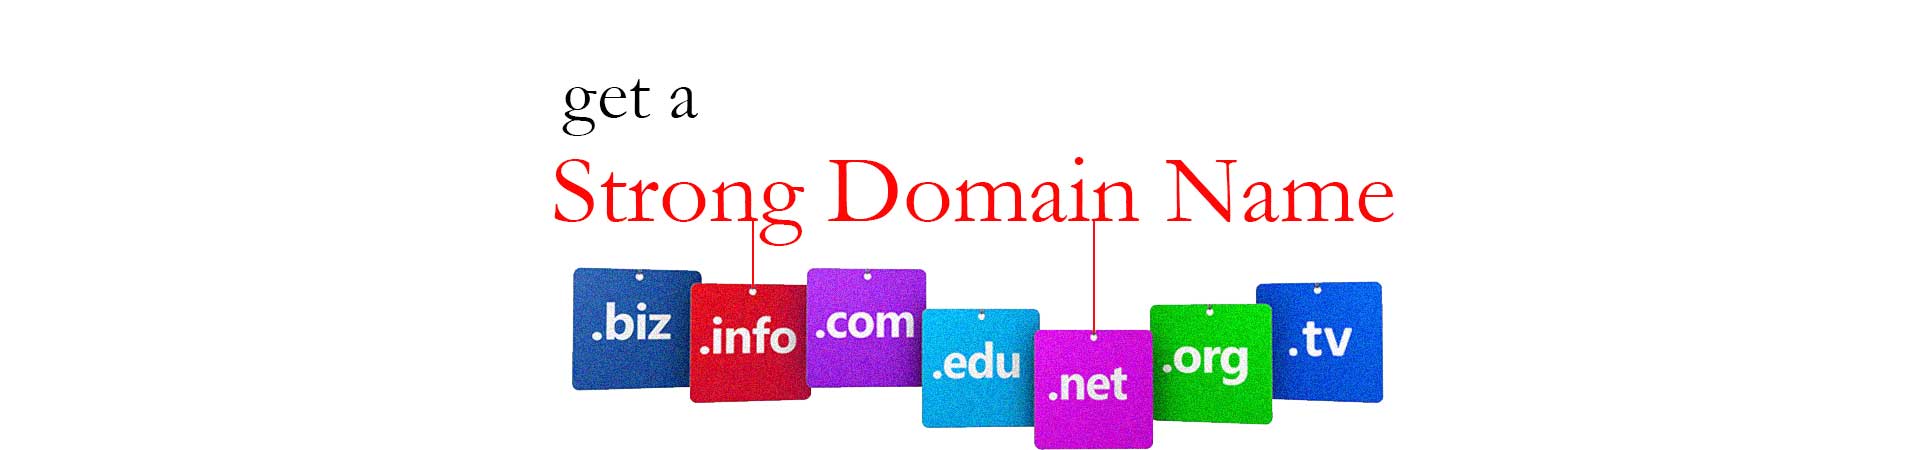 get a strong domain name